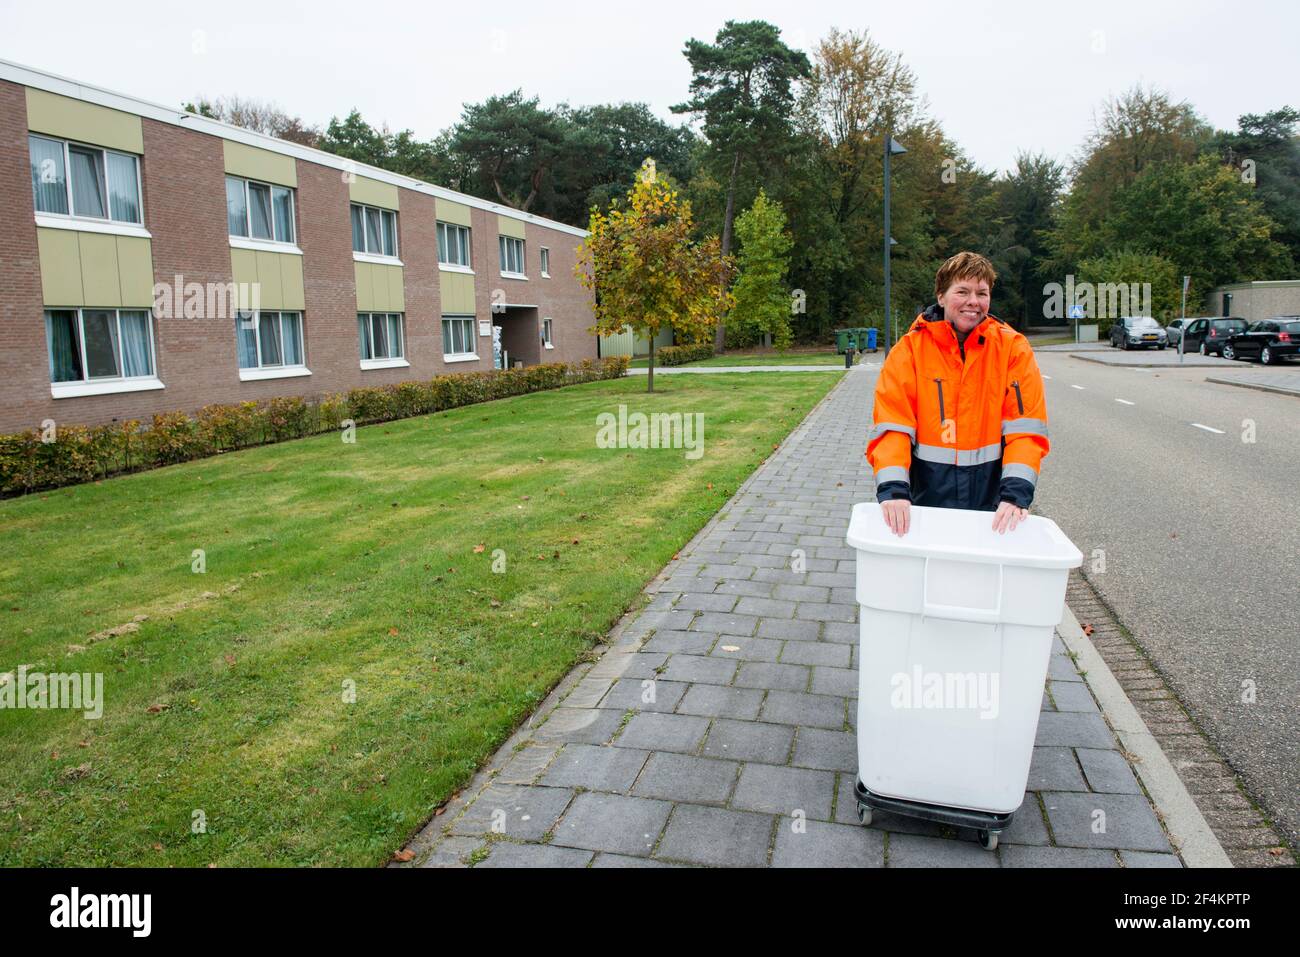 Airbase, Gilze-Rijen, Netherlands. Single mentally challenged civilian employee of an Airbase taking care of laundry at the Dutch airforce base. Stock Photo